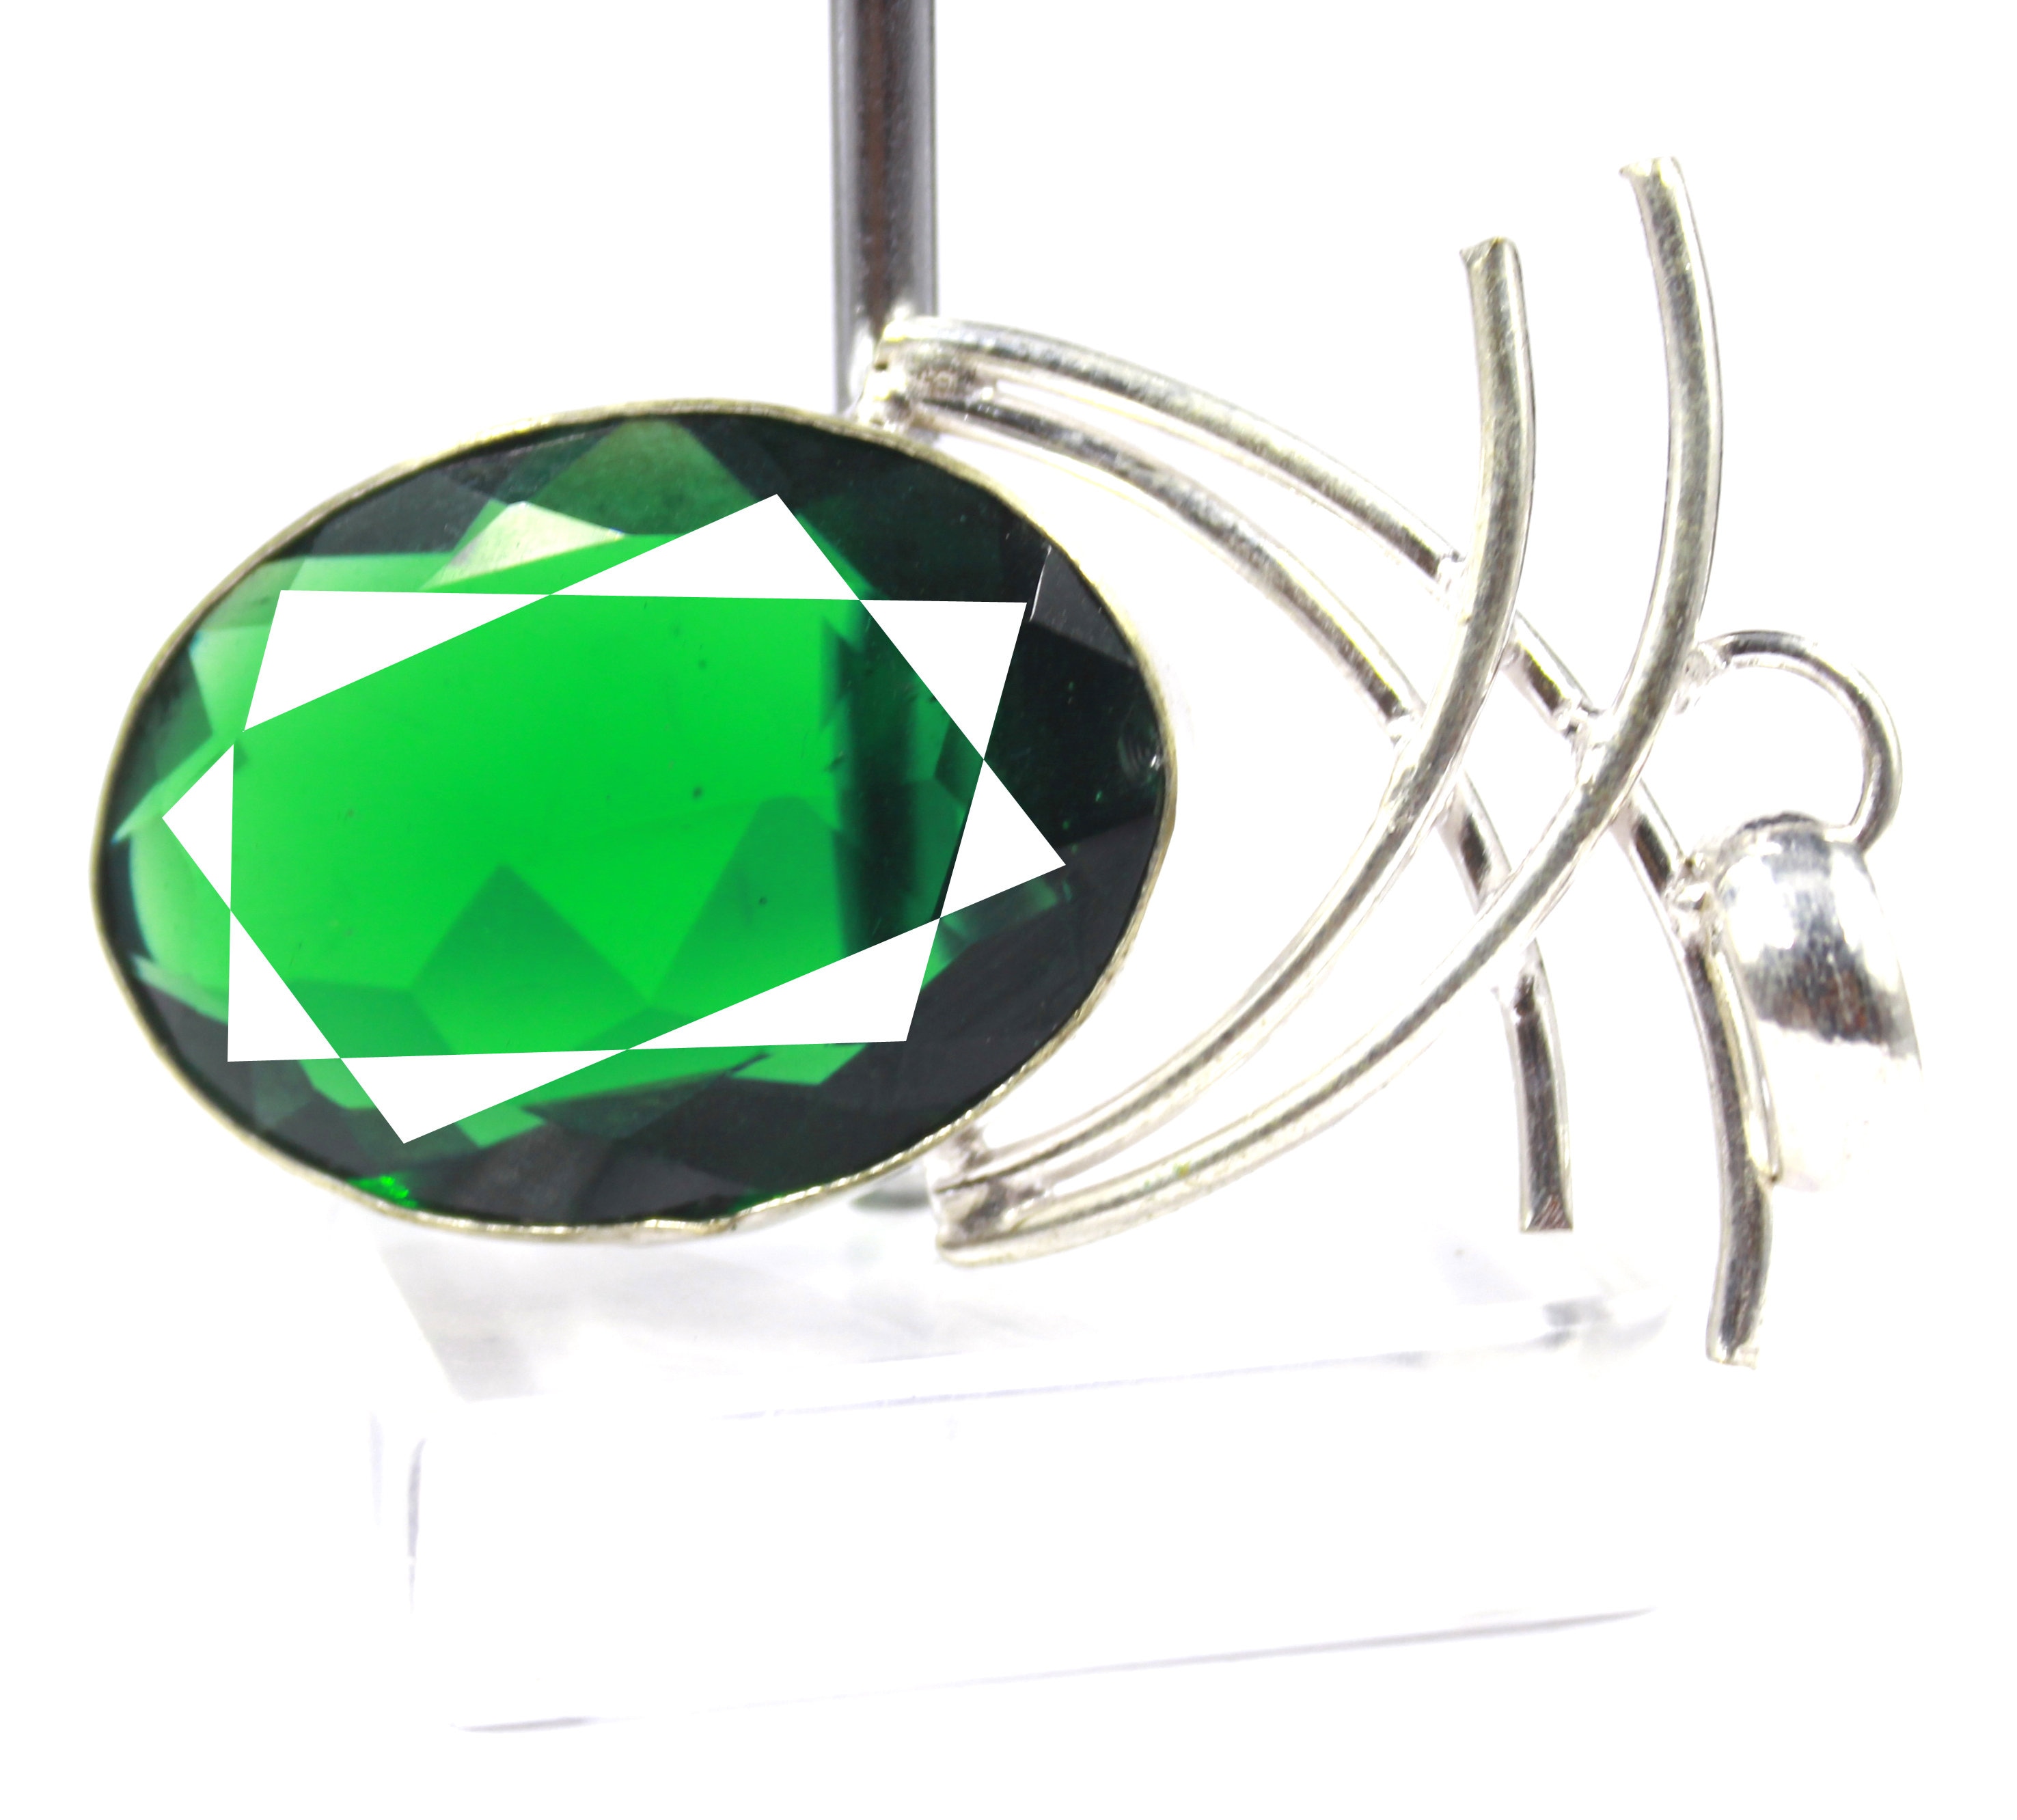 73.75 Carat Oval Shape Green Moldavite 925 Sterling Silver Pendant From Czech Republic With Free Silver Chain